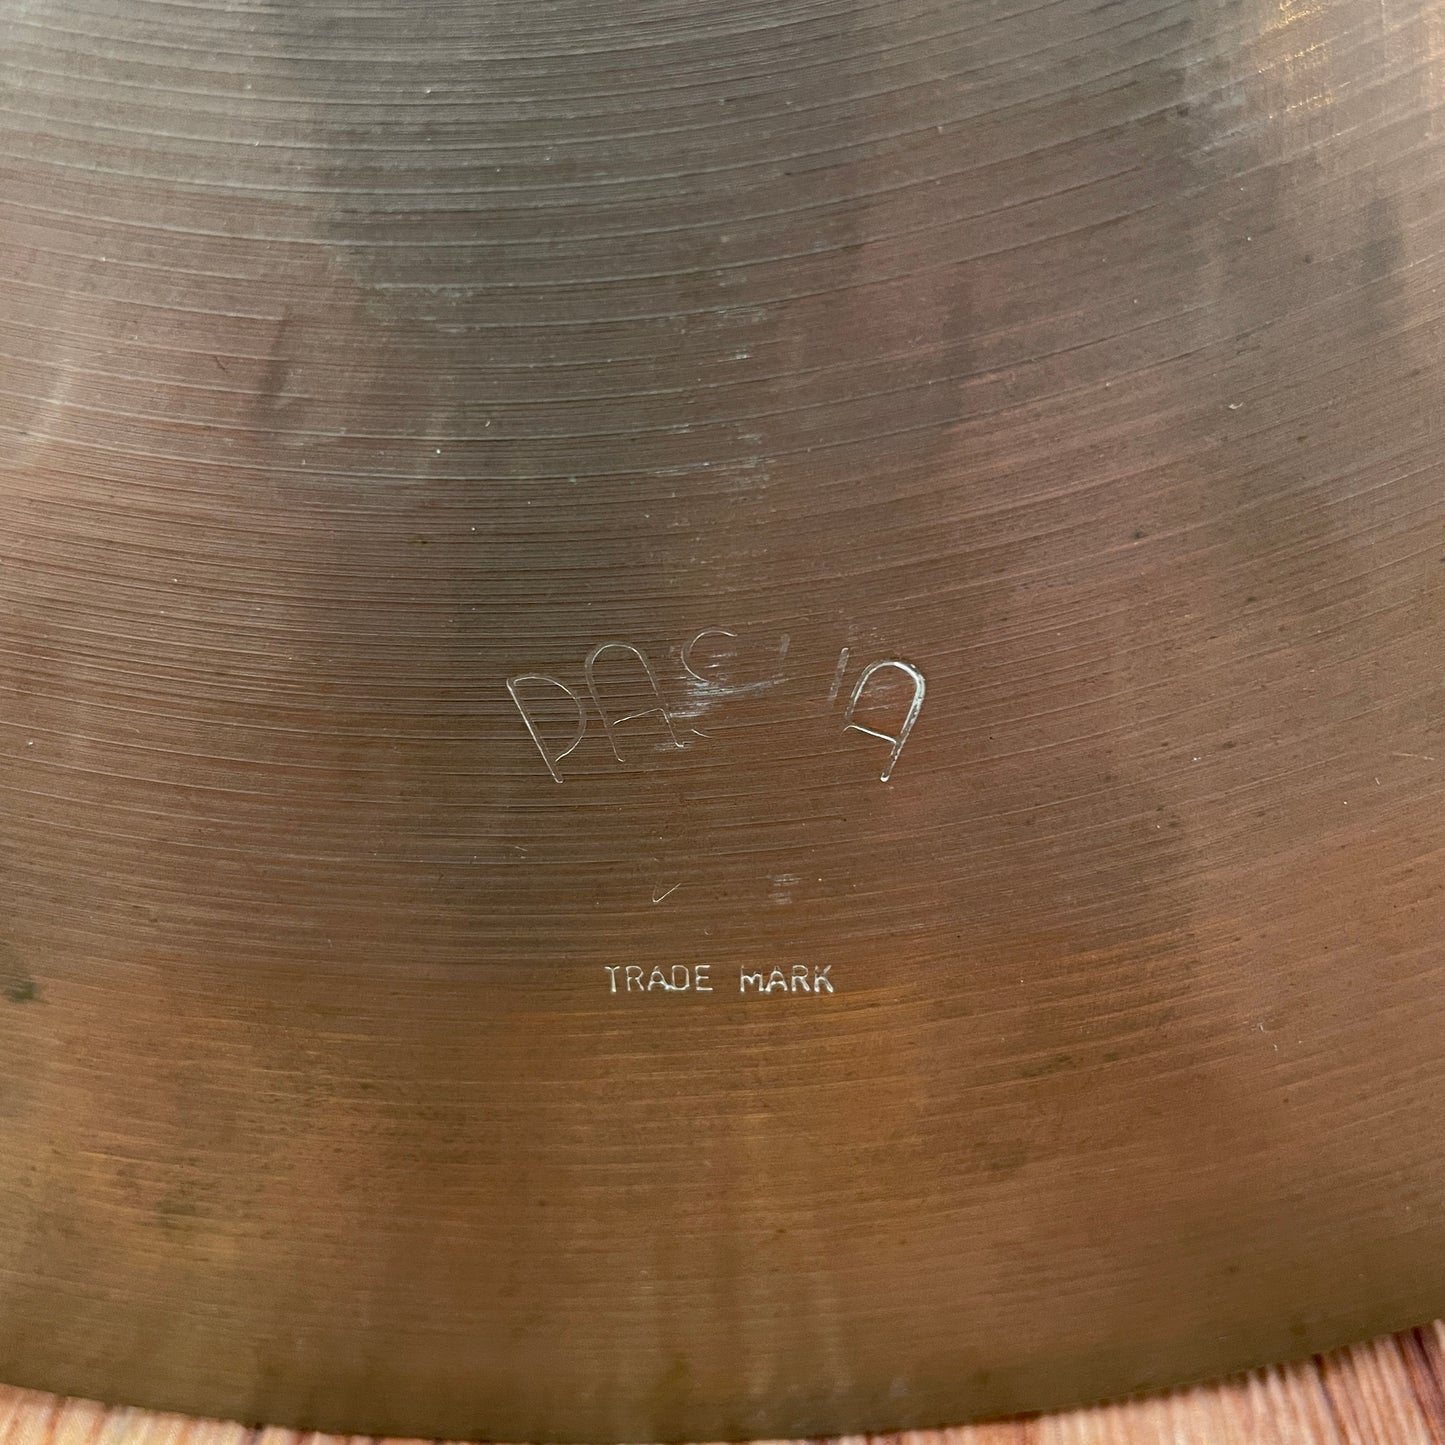 14" Pasha Heavy Band Small Ride / Hi-Hat Cymbal Single 1120g Made in Italy *Video Demo*